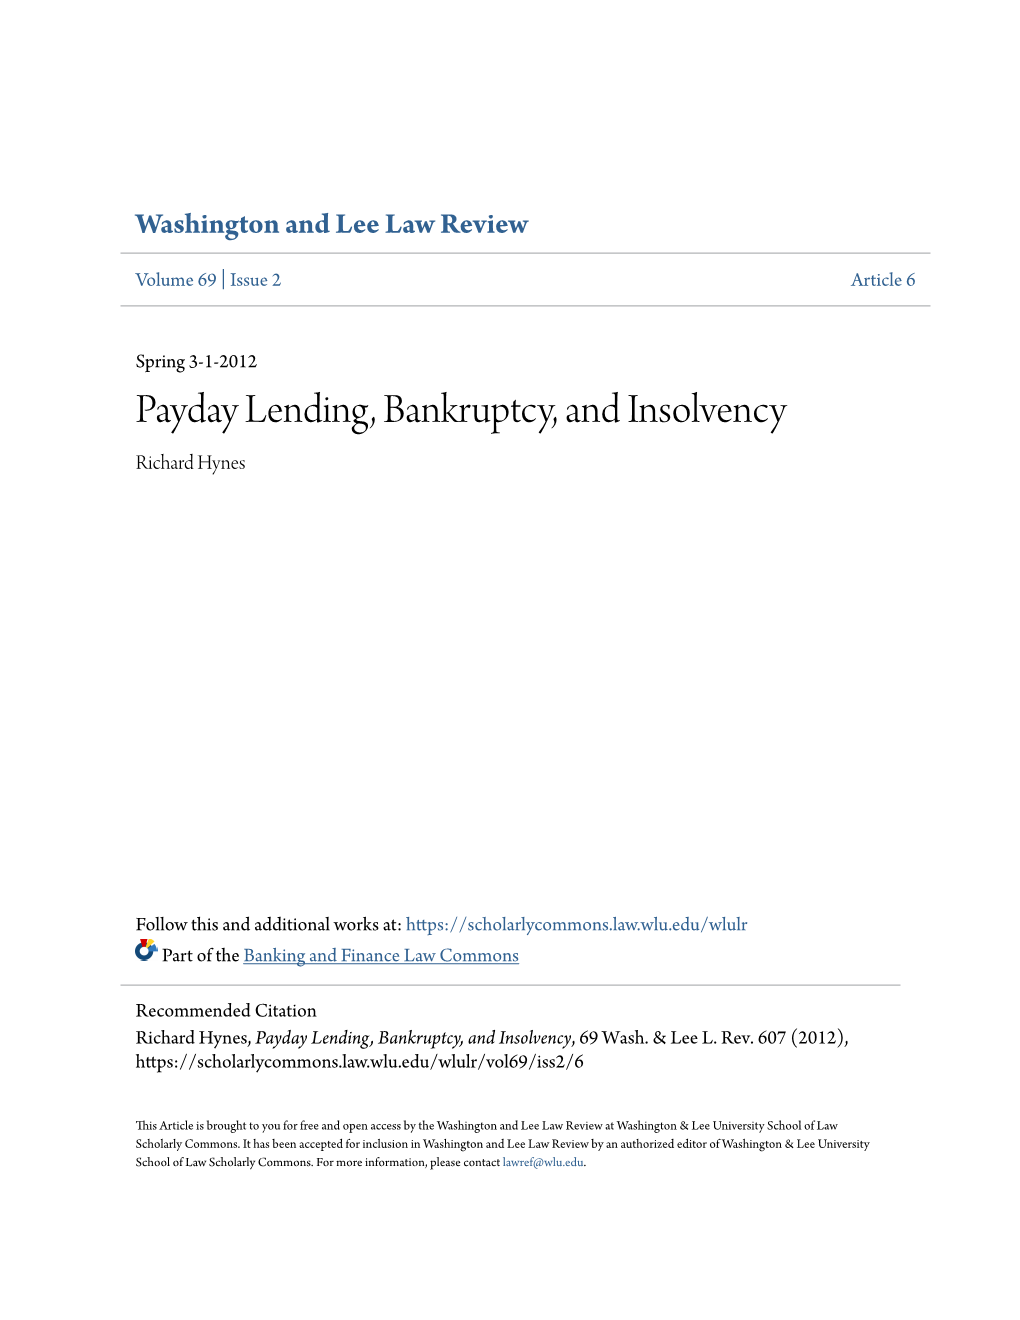 Payday Lending, Bankruptcy, and Insolvency Richard Hynes